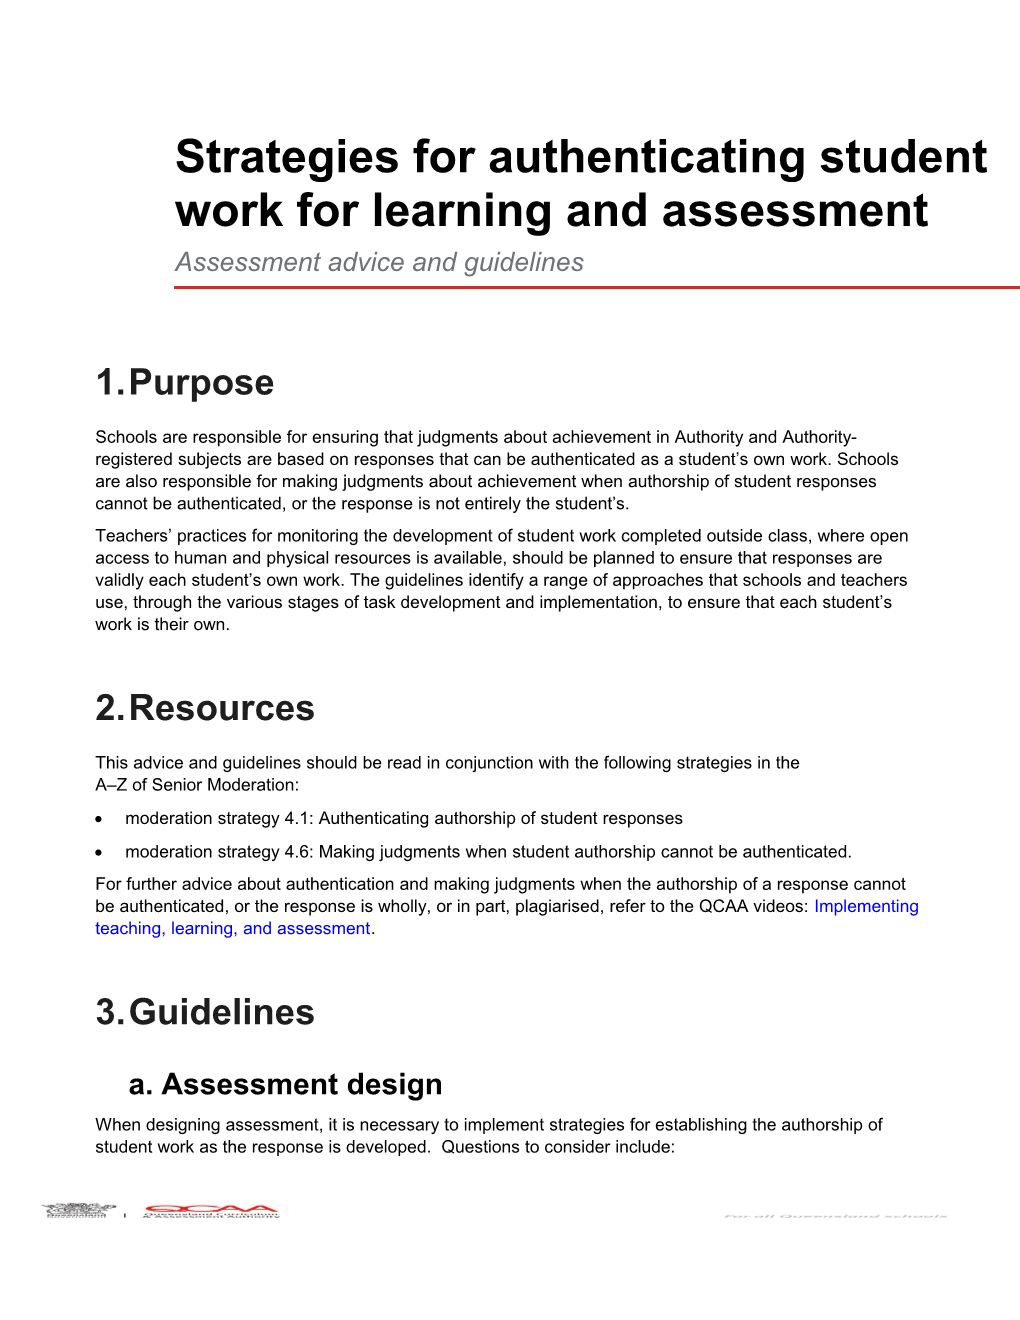 Strategies for Authenticating Student Work for Learning and Assessment